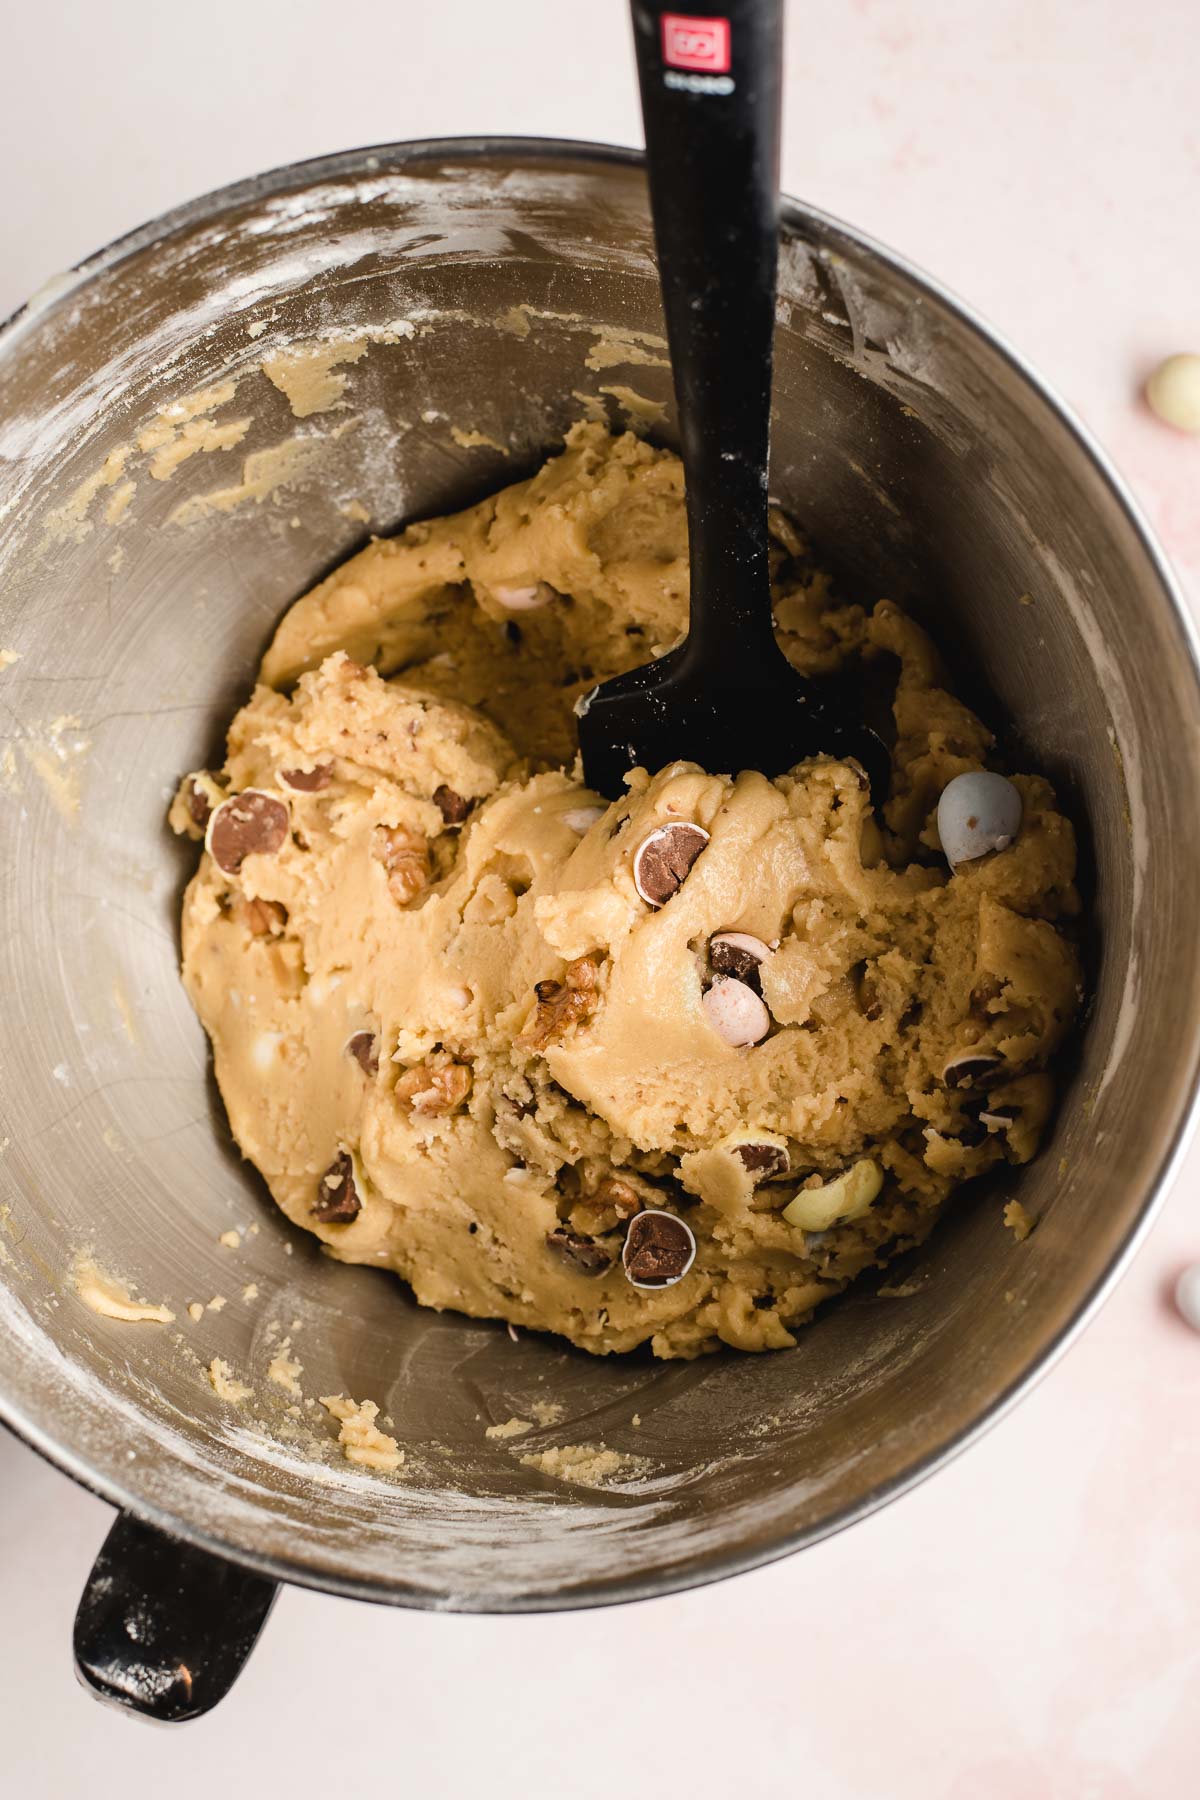 cadbury egg cookie dough shown in the bowl of an electric mixer.